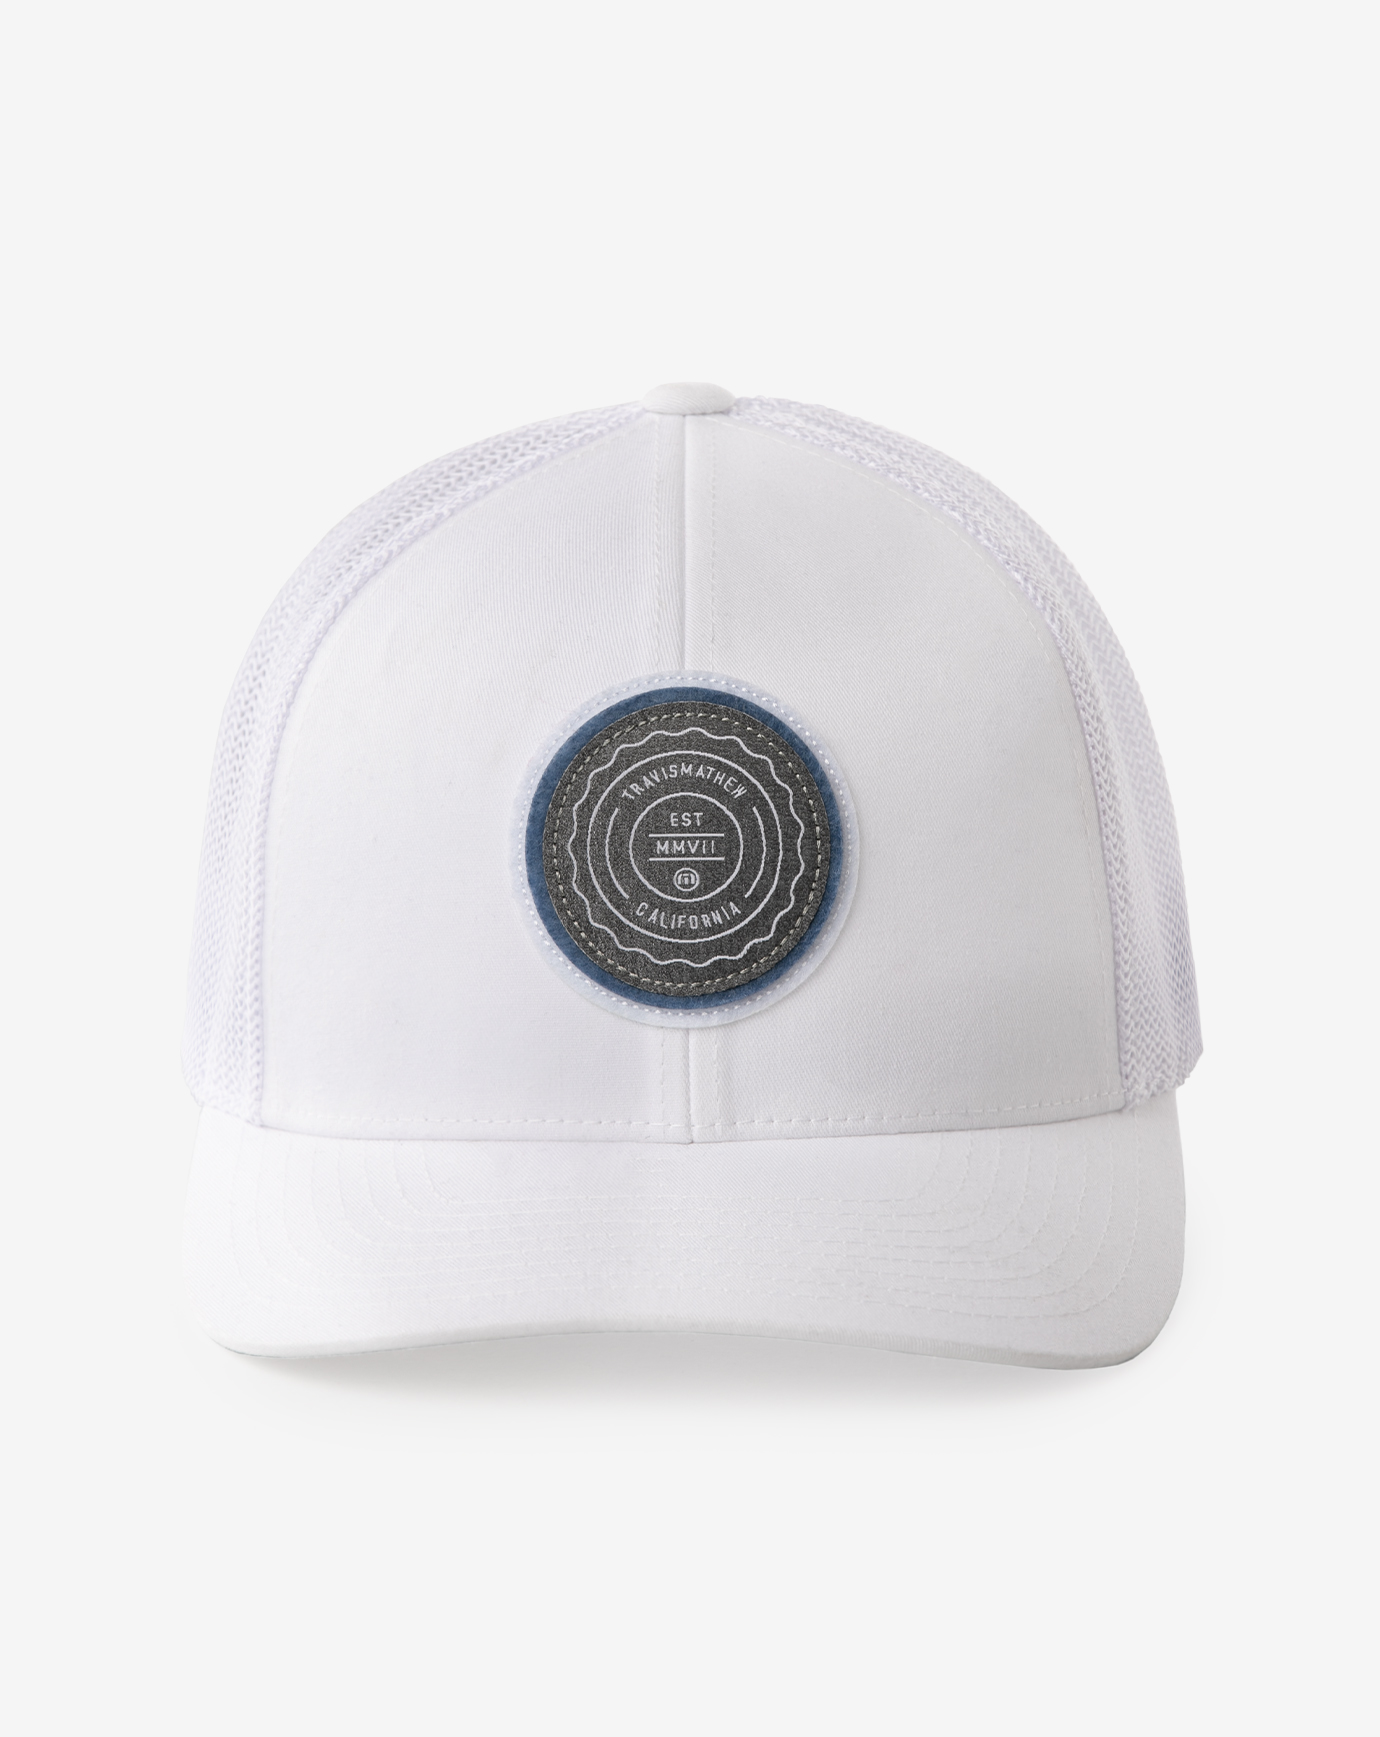 THE PATCH SNAPBACK HAT 1